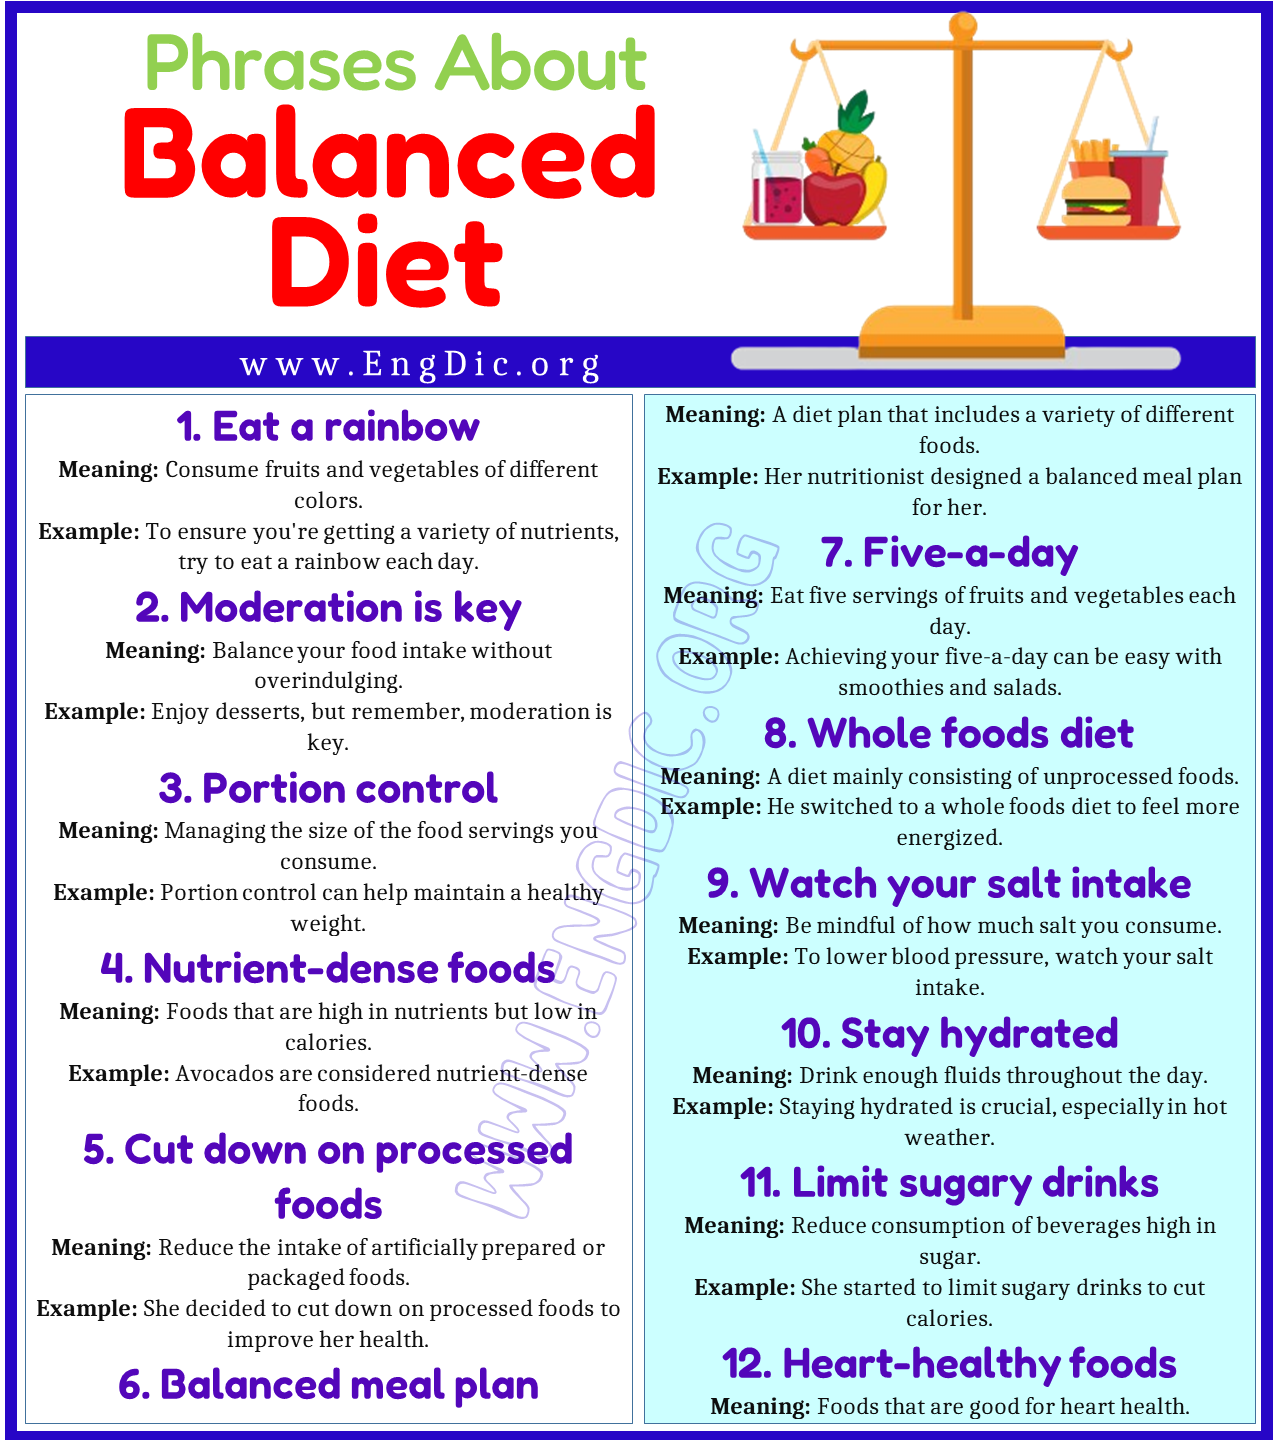 Phrases about a Balanced Diet